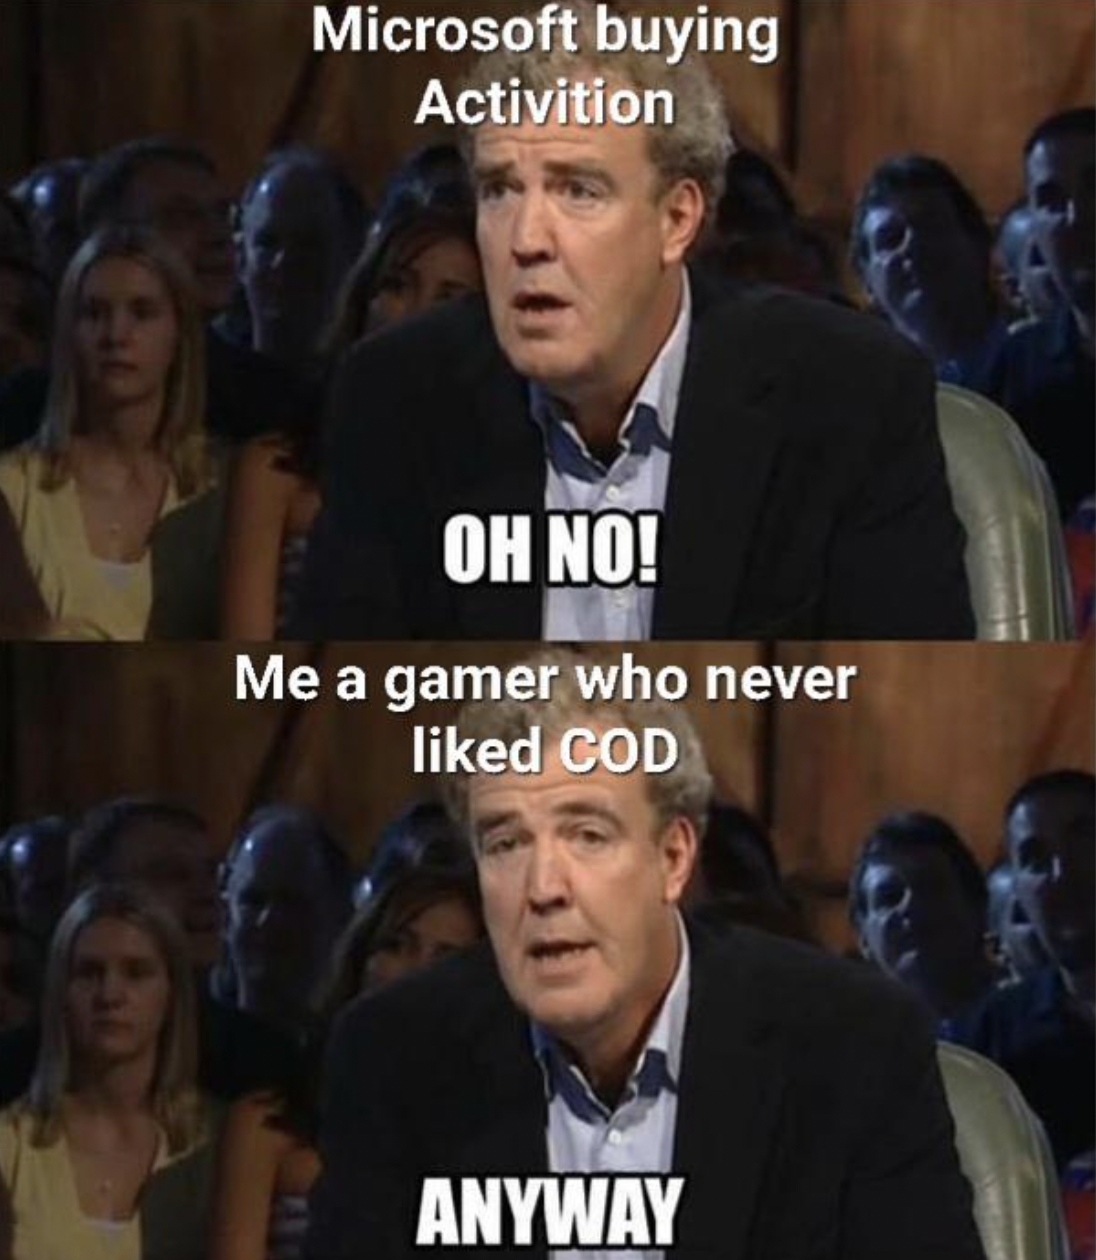 PS5 memes - oh no anyway meme - Microsoft buying Activition Oh No! Me a gamer who never d Cod Anyway